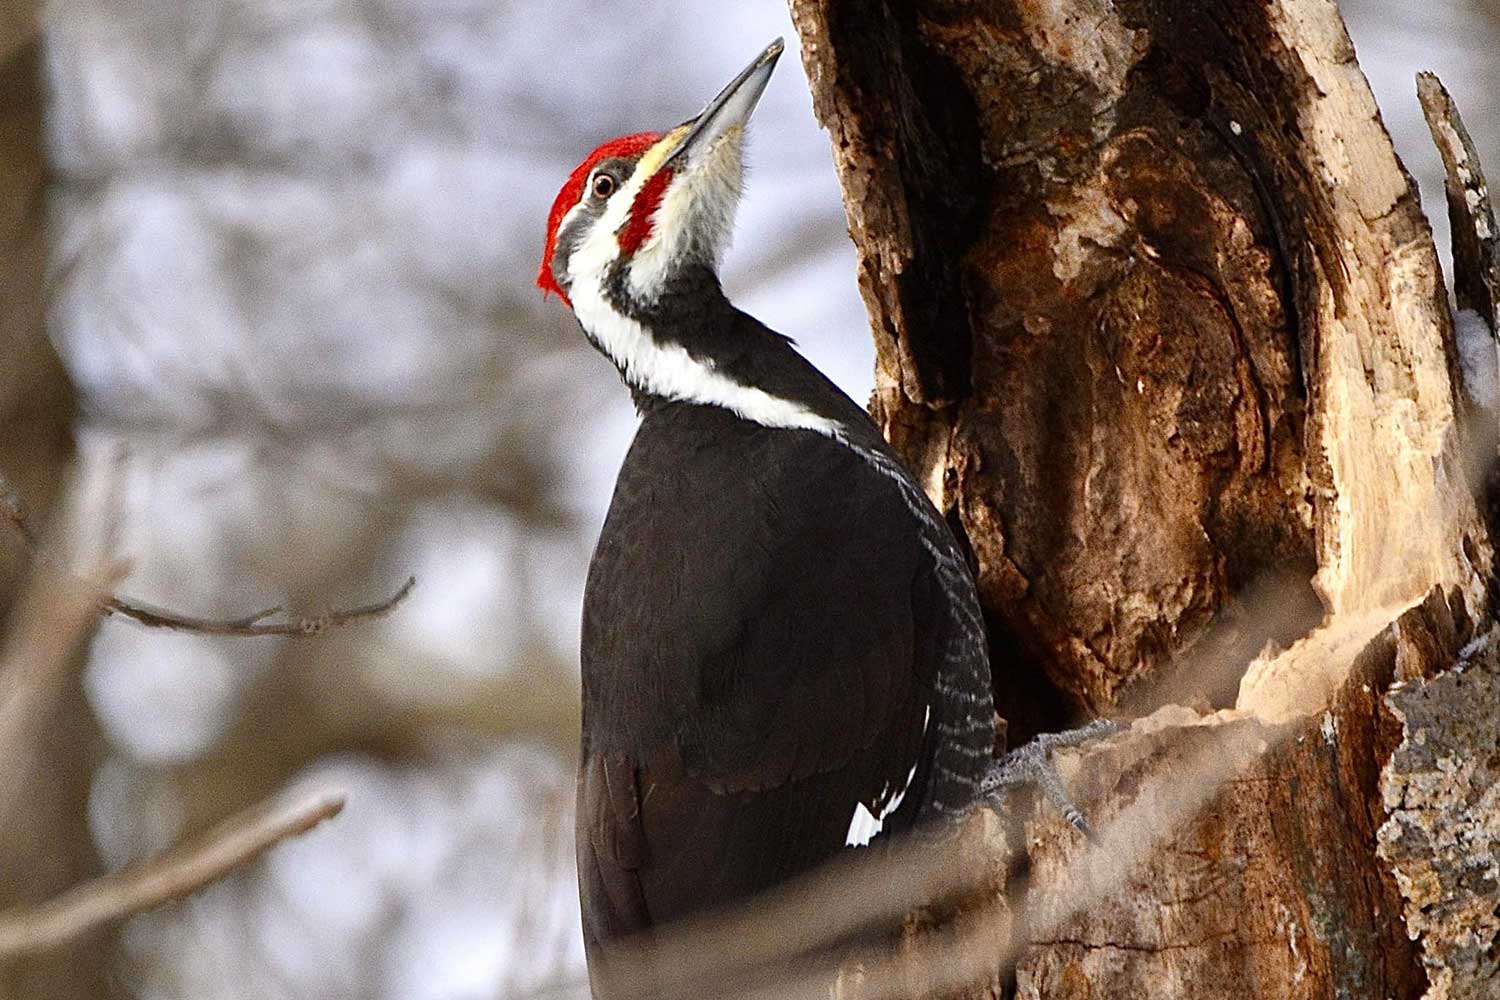 A pileated woodpecker perched on a tree cavity while excavating.